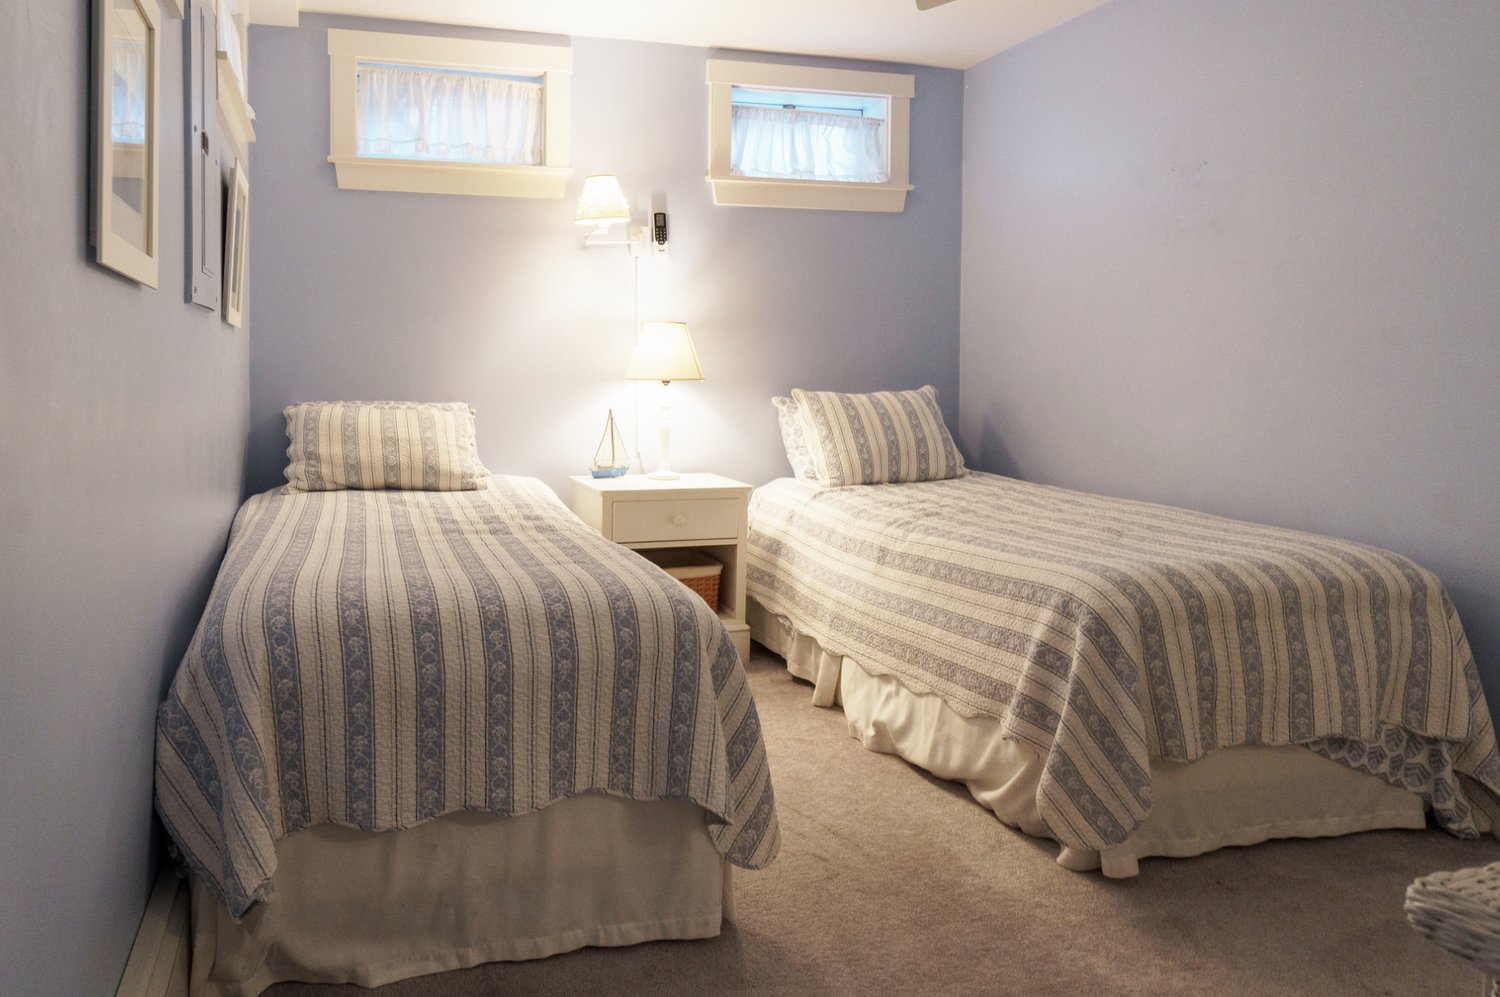 The guest bedroom has more than enough room for a pair of twin beds.